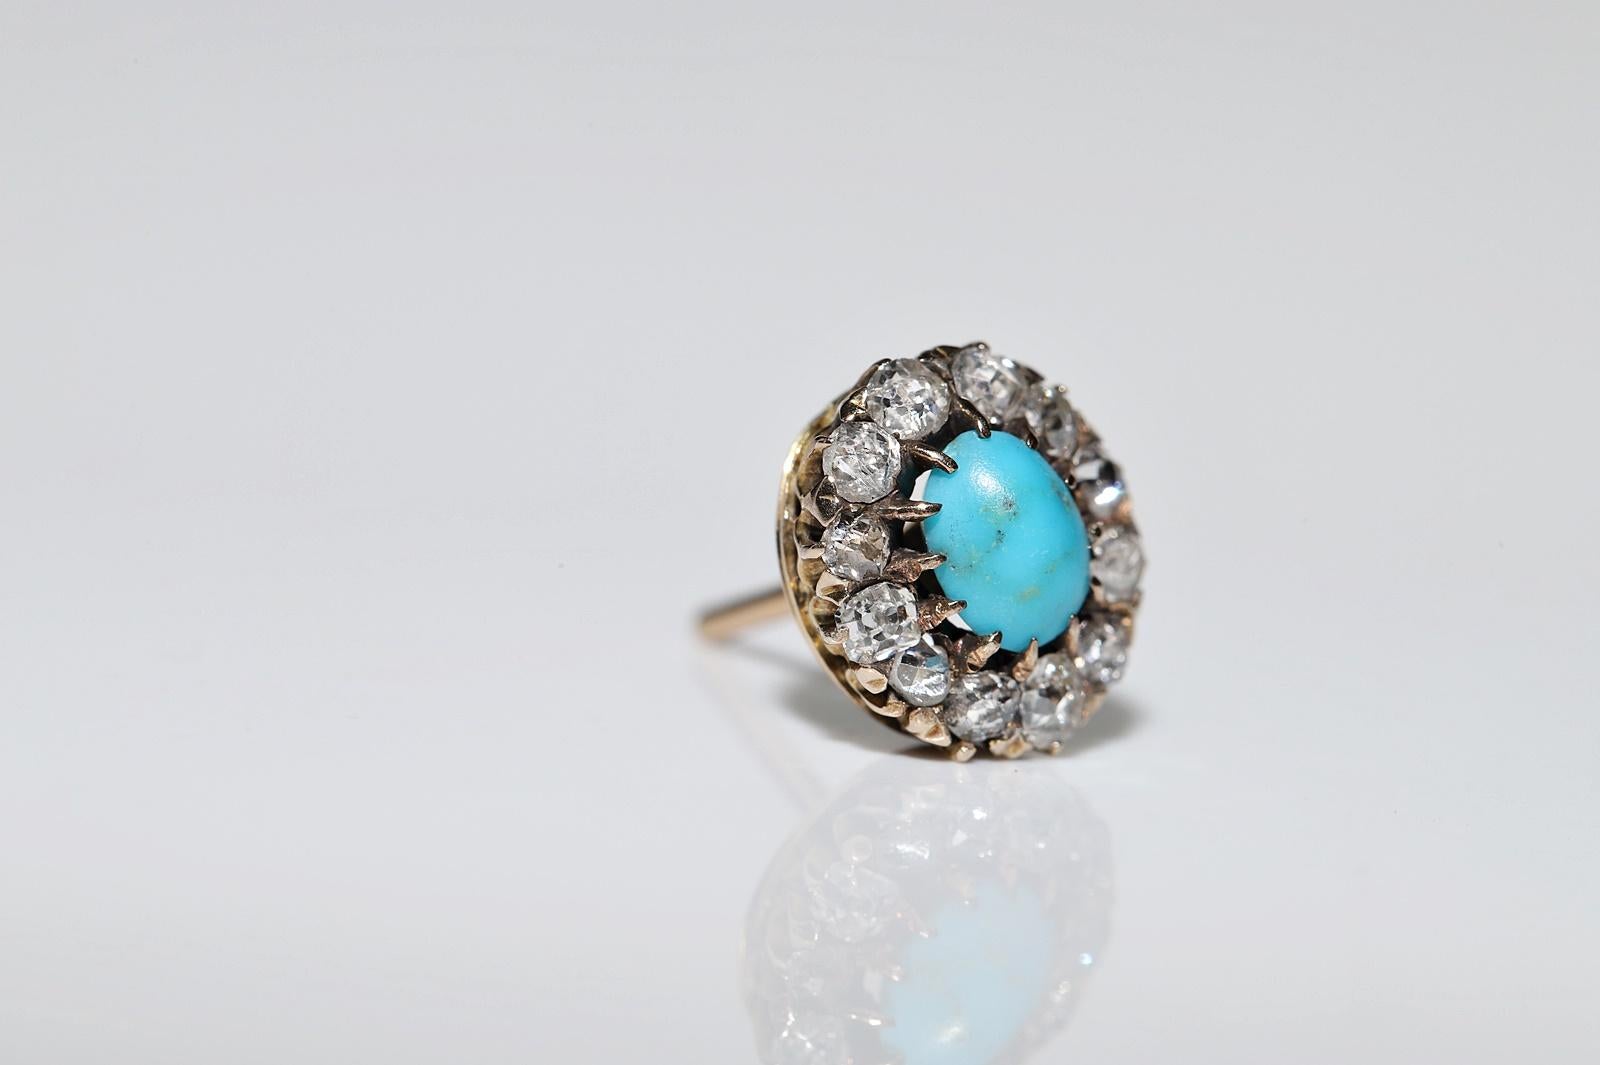 Antique Circa 1900s 14k Gold Natural Diamond And Turquoise Decorated Earring For Sale 8